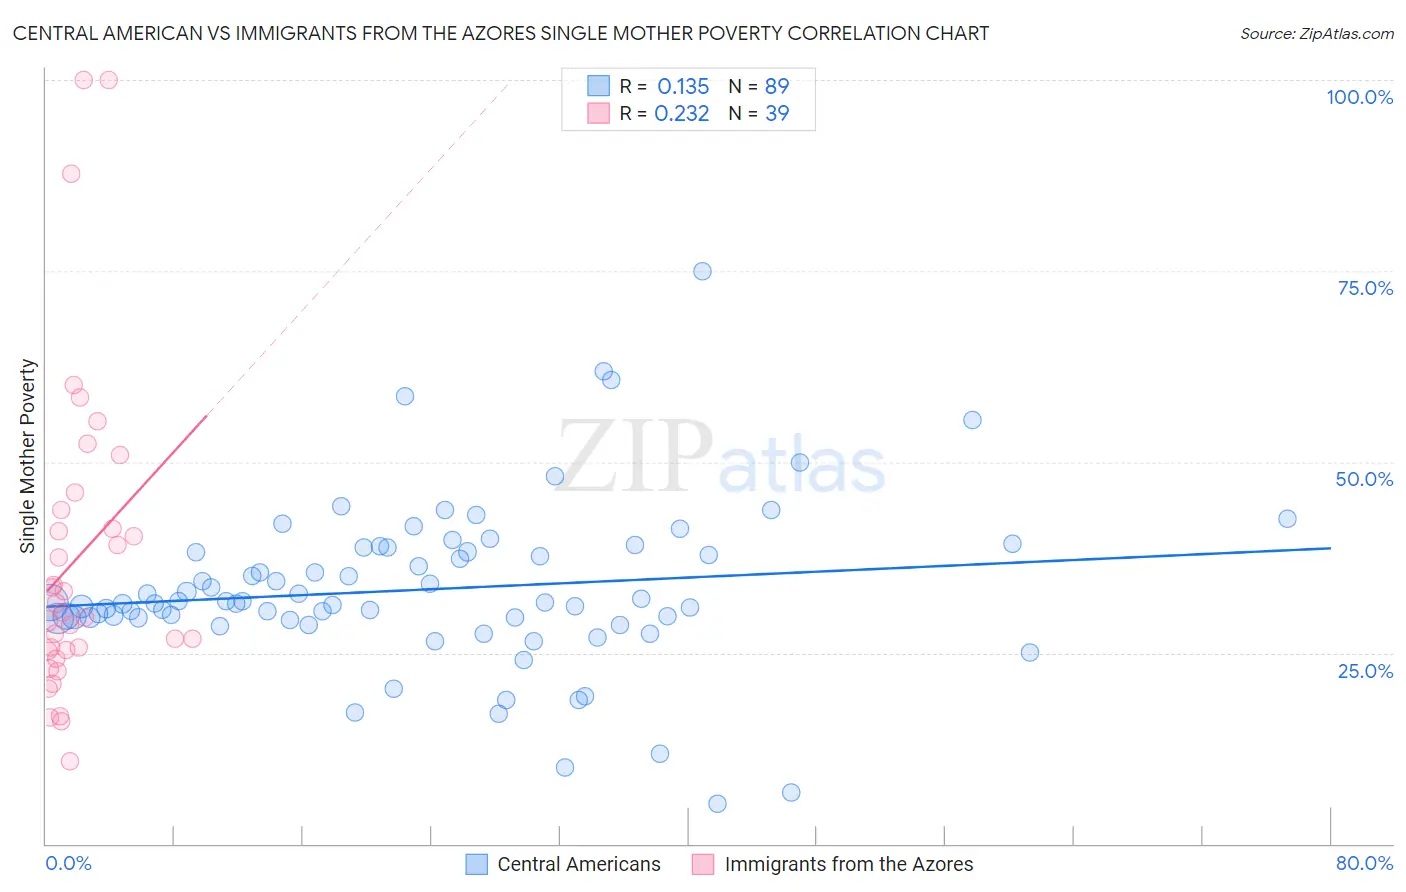 Central American vs Immigrants from the Azores Single Mother Poverty